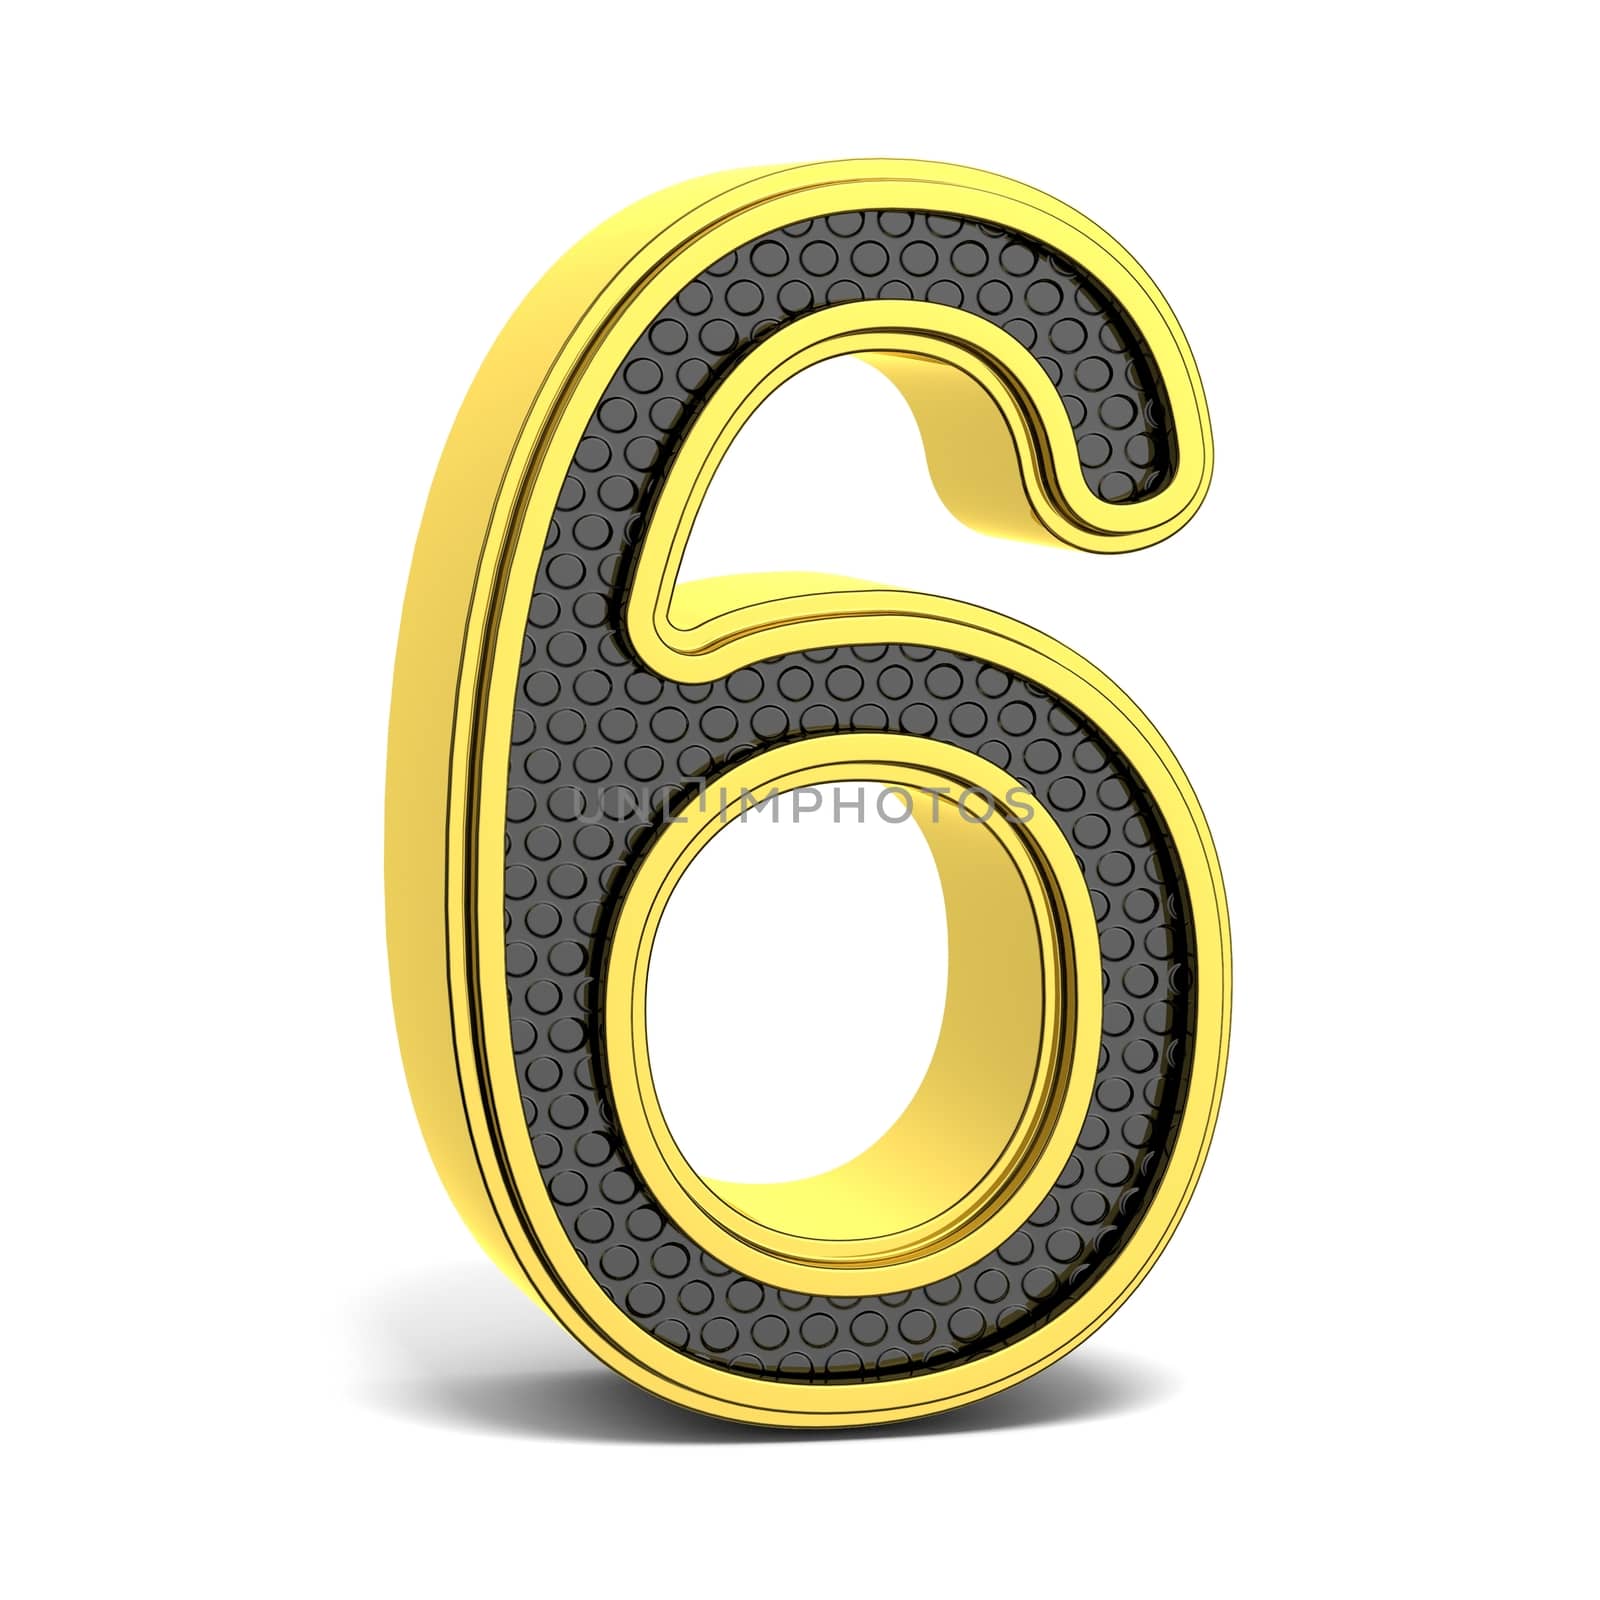 Golden and black round font. Number 6. 3D render illustration isolated on white background with soft shadow